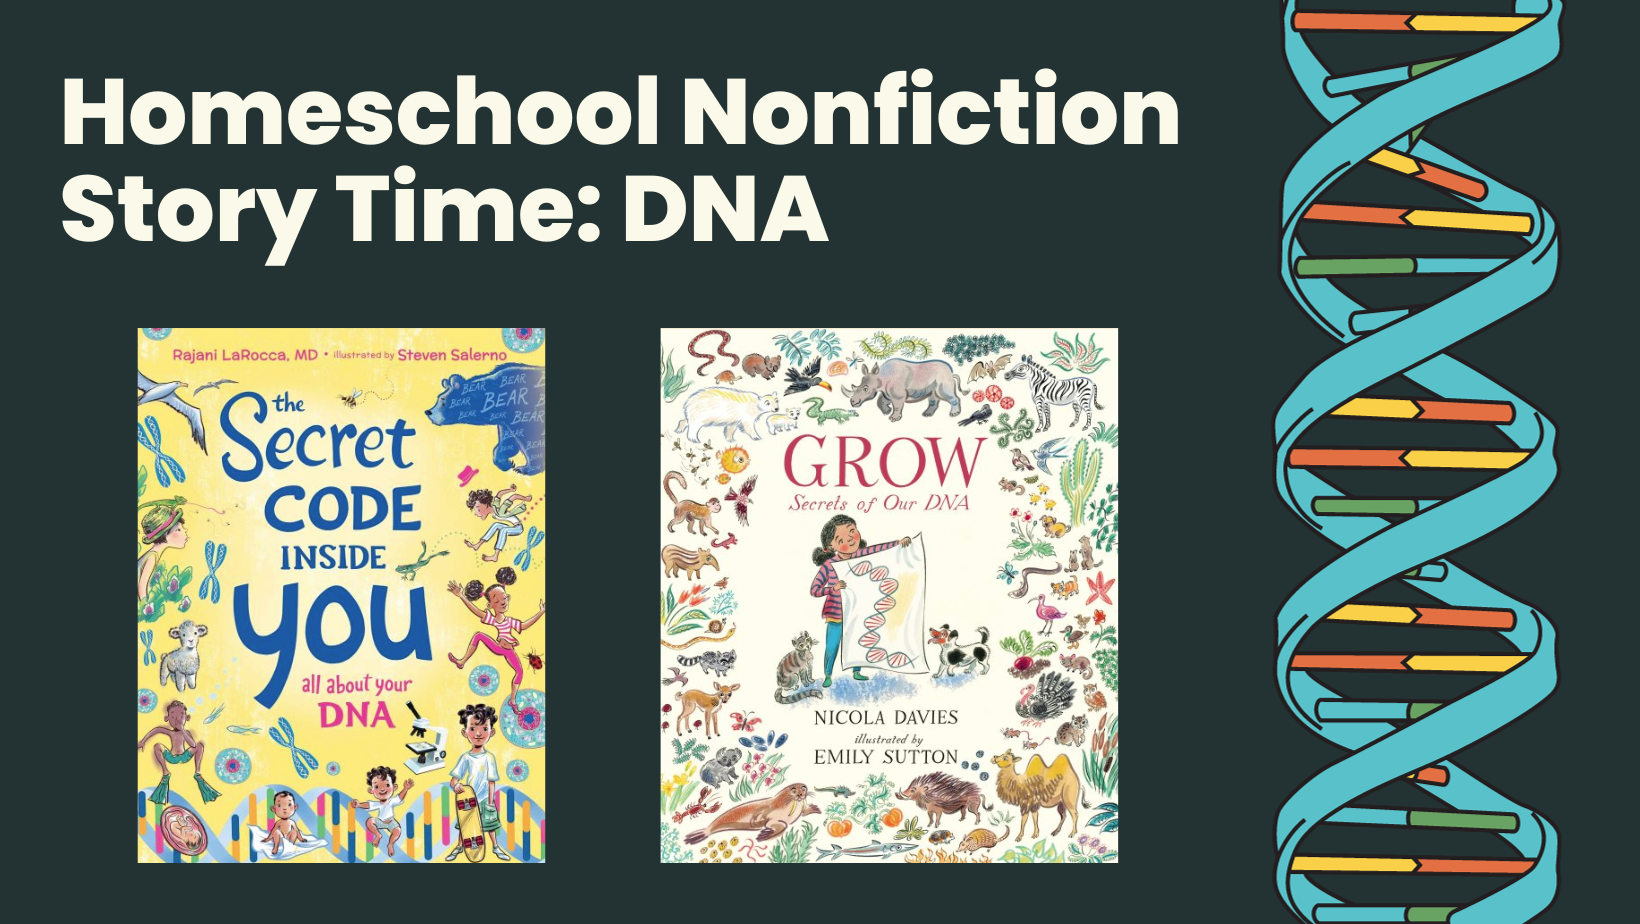 Homeschool Nonfiction book covers and dna strand